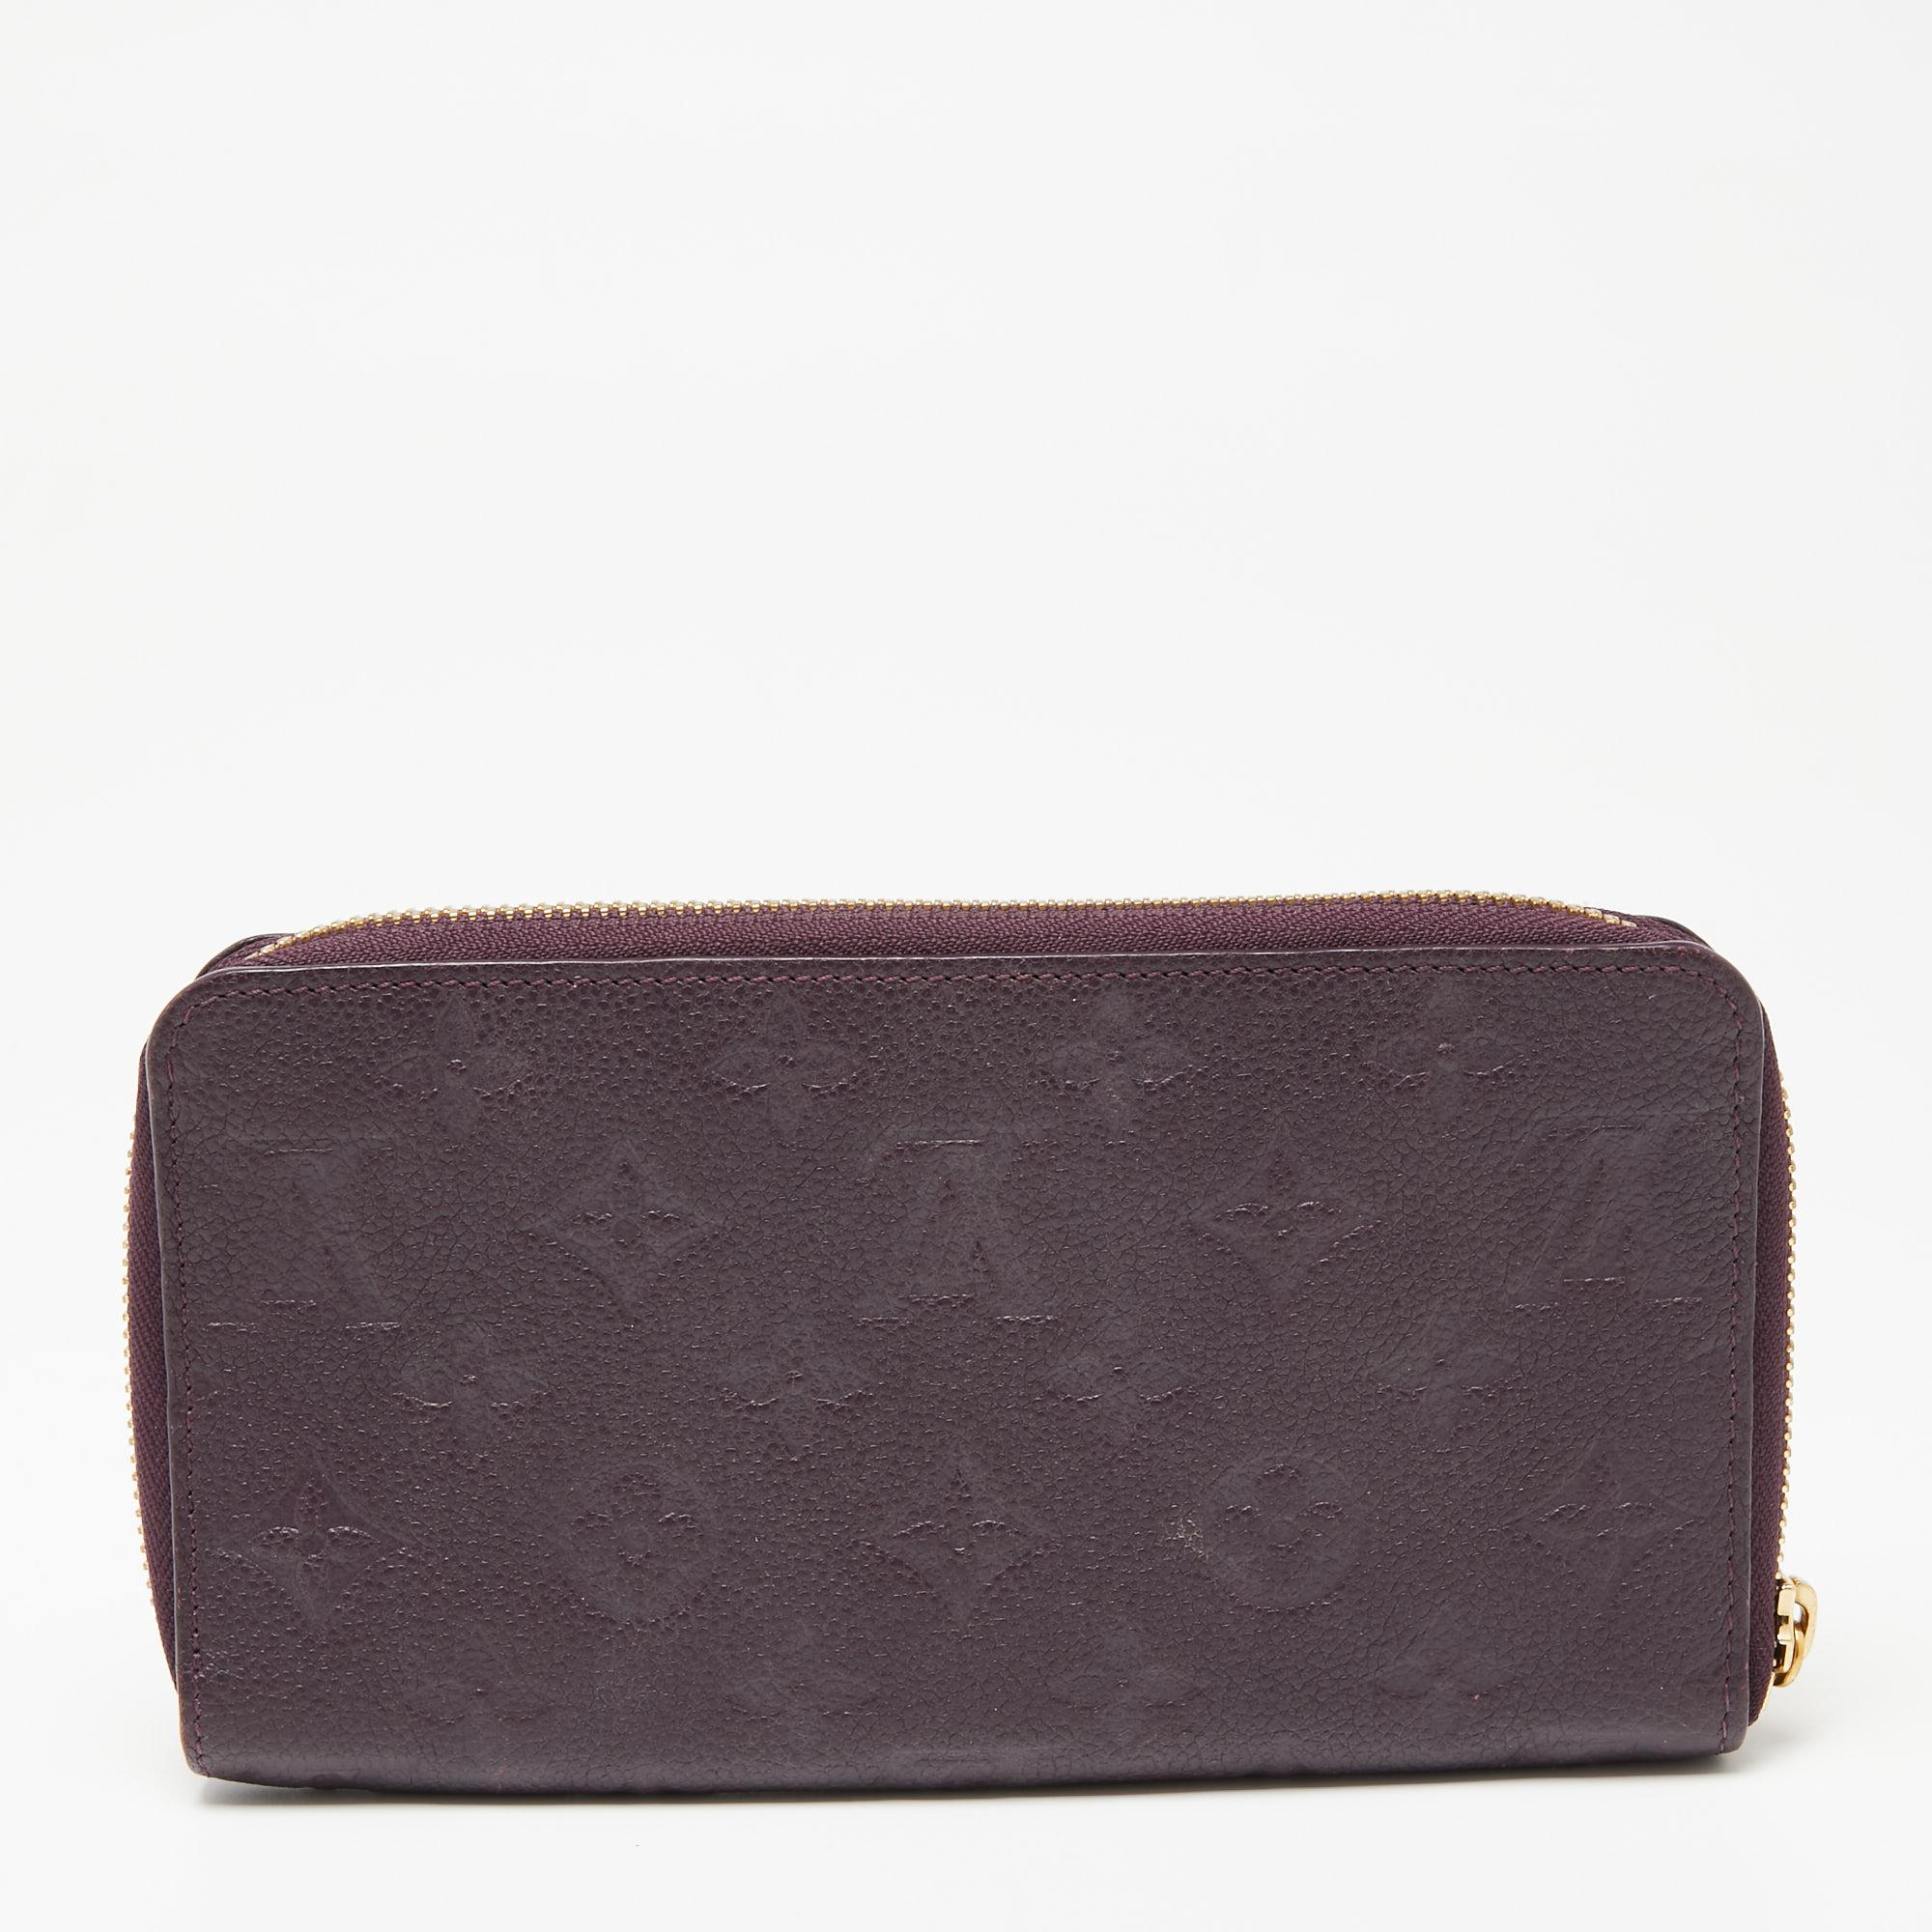 This Louis Vuitton Zippy wallet is carefully designed for everyday use. Crafted from Monogram Empreinte leather, the wallet has a wide zip closure that opens to reveal multiple slots and leather-lined compartments for you to neatly arrange your